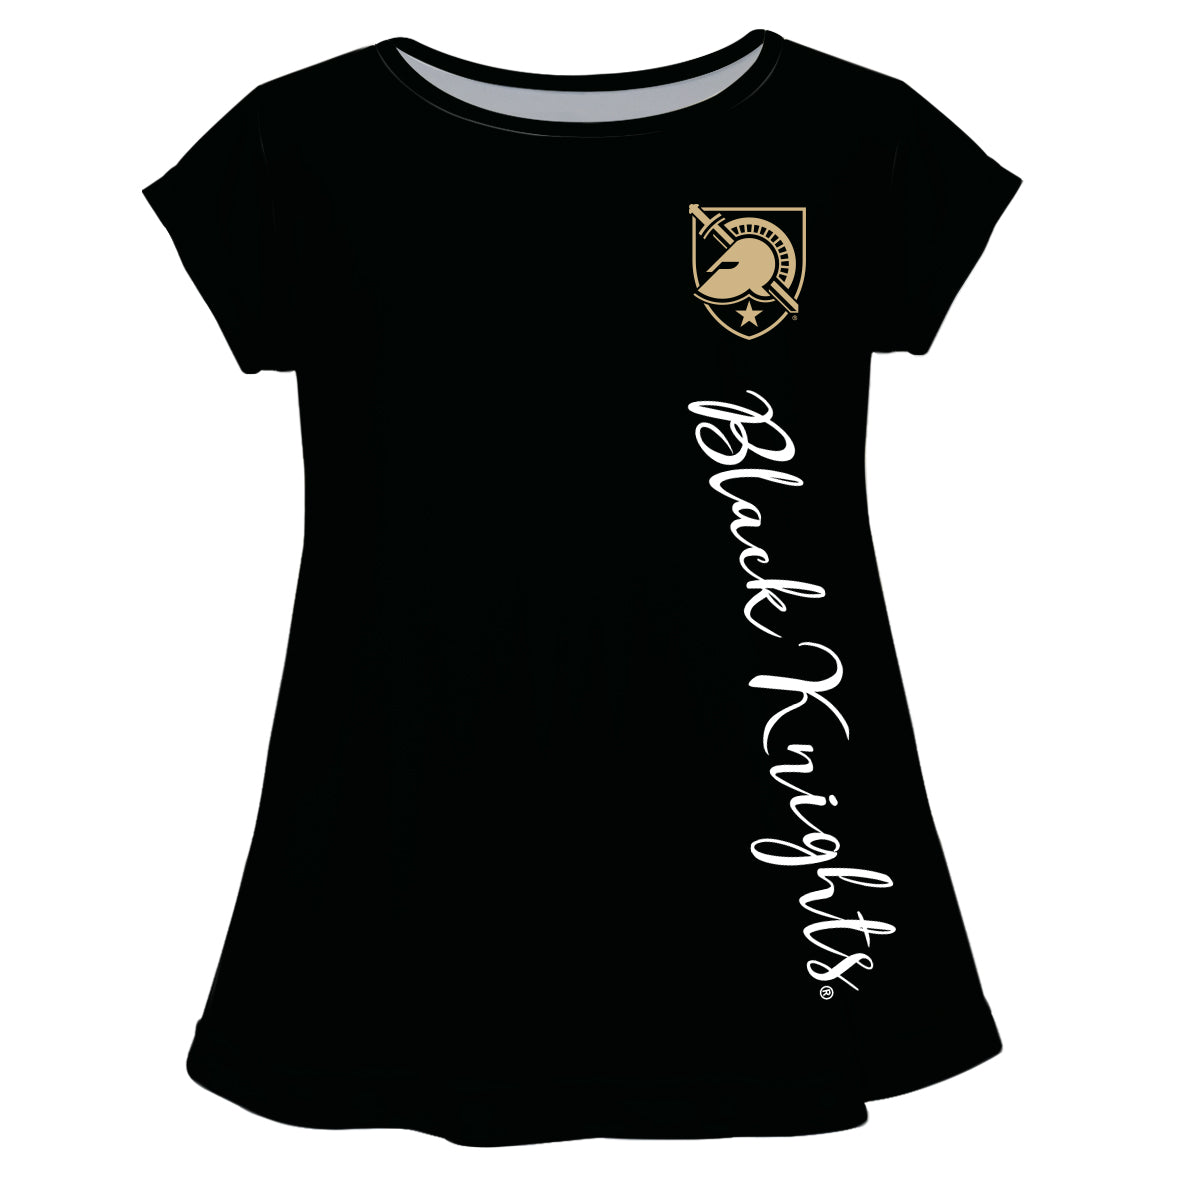 United States Military Academy Black Knights Black Solid Short Sleeve Girls Laurie Top by Vive La Fete